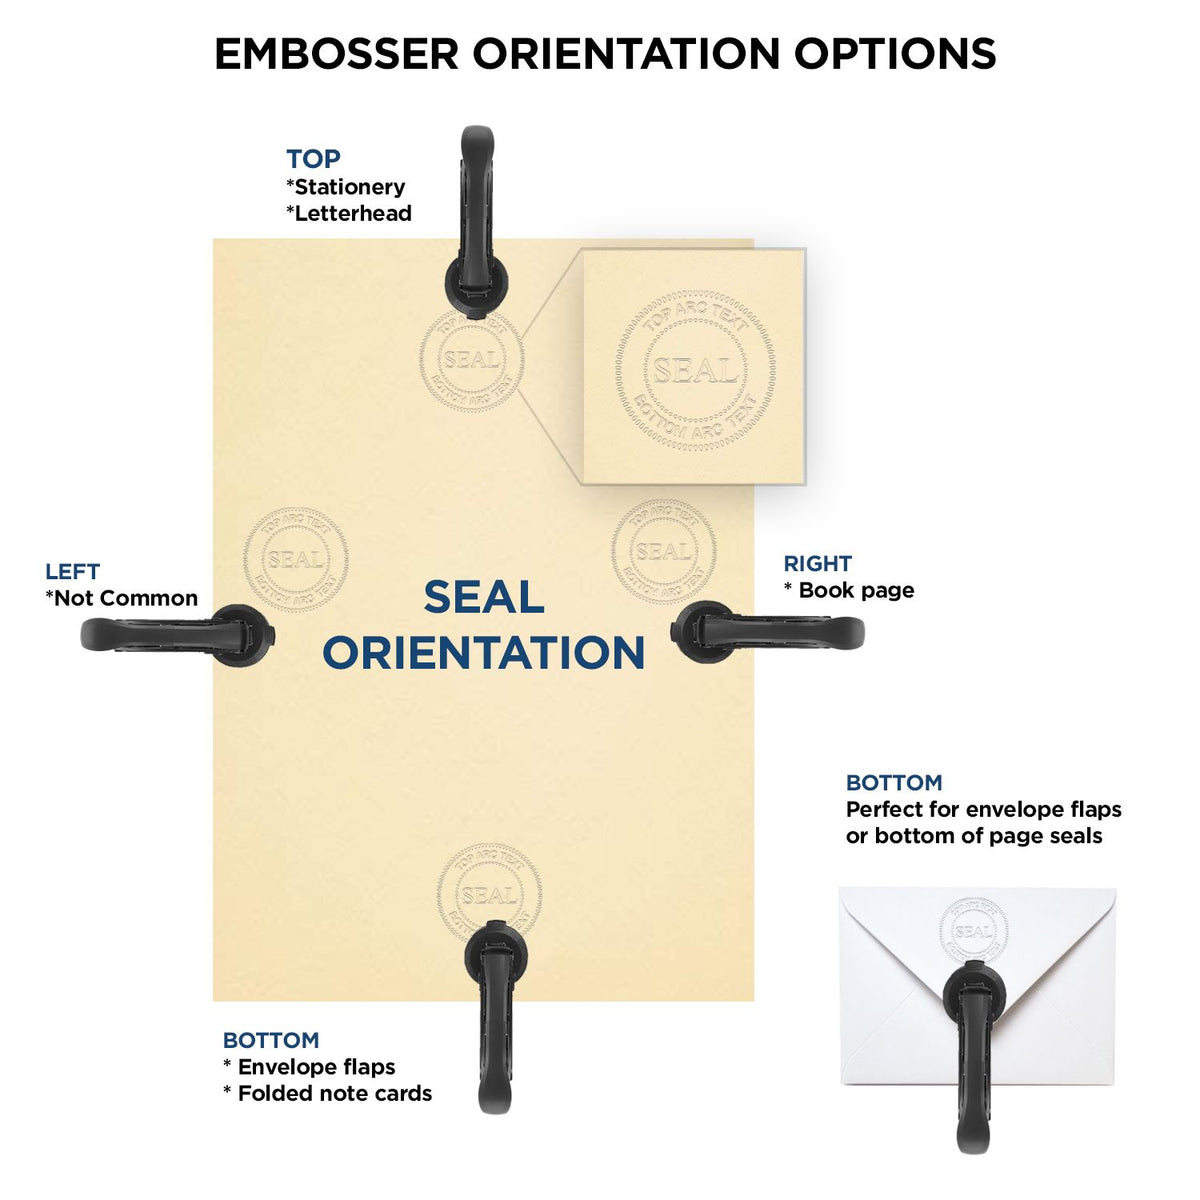 An infographic for the Handheld Nevada Professional Engineer Embosser showing embosser orientation, this is showing examples of a top, bottom, right and left insert.